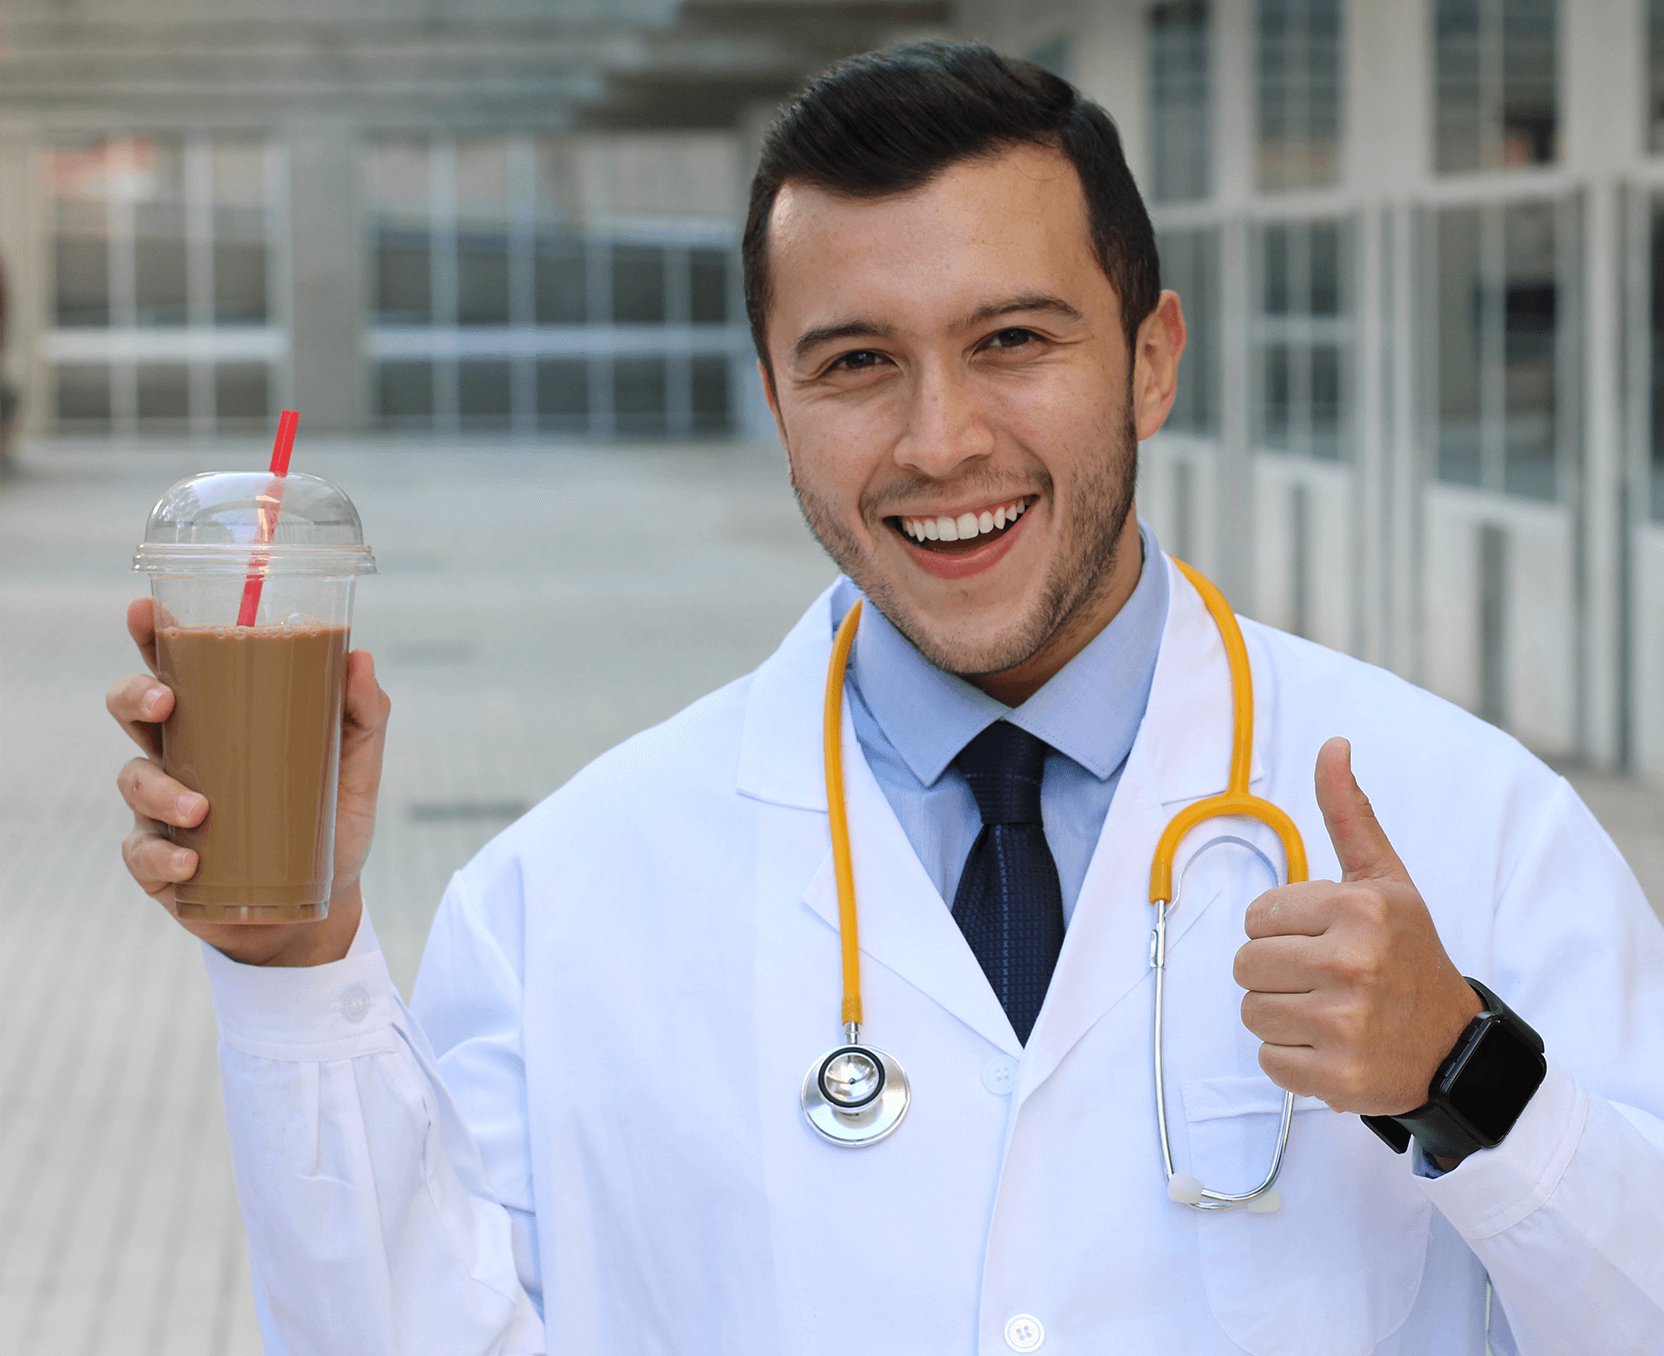 A man in a white lab coat holding a cup of coffee